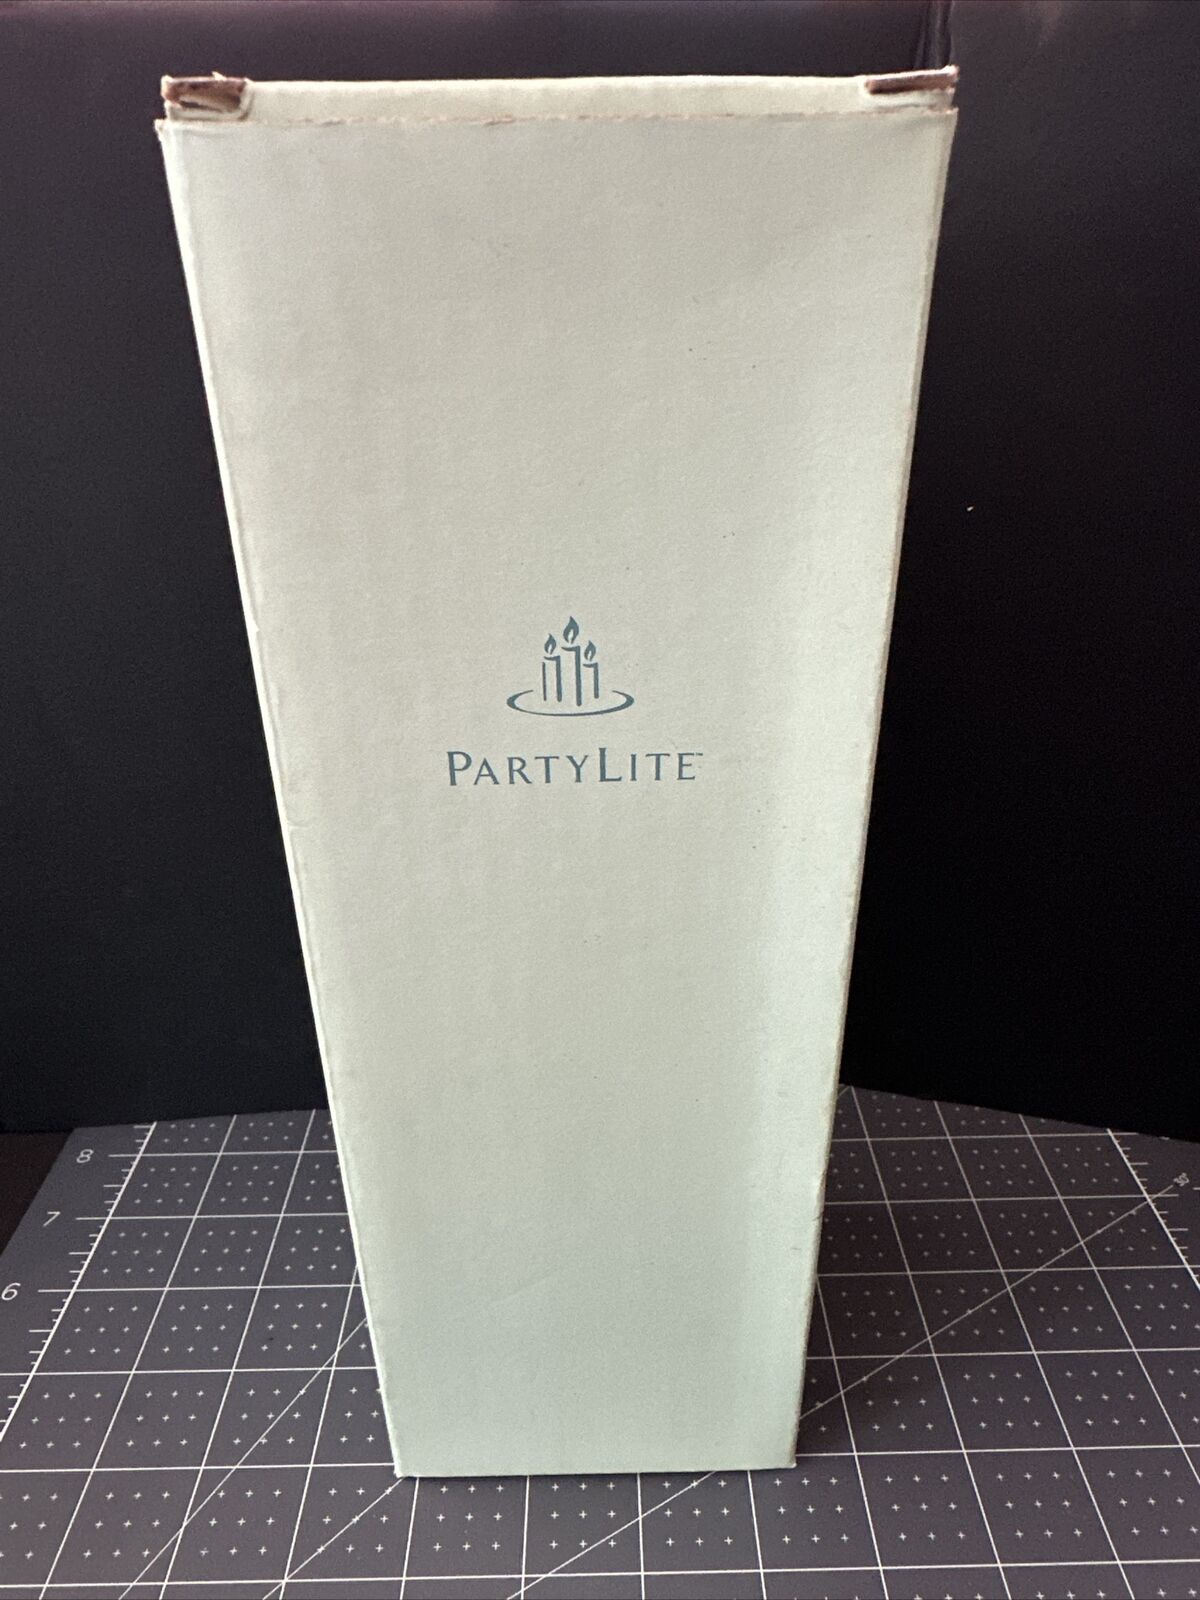 PartyLite 3 P7161 Jewel Candle Frosted Glass Tulip Votive Tealite Holders - New